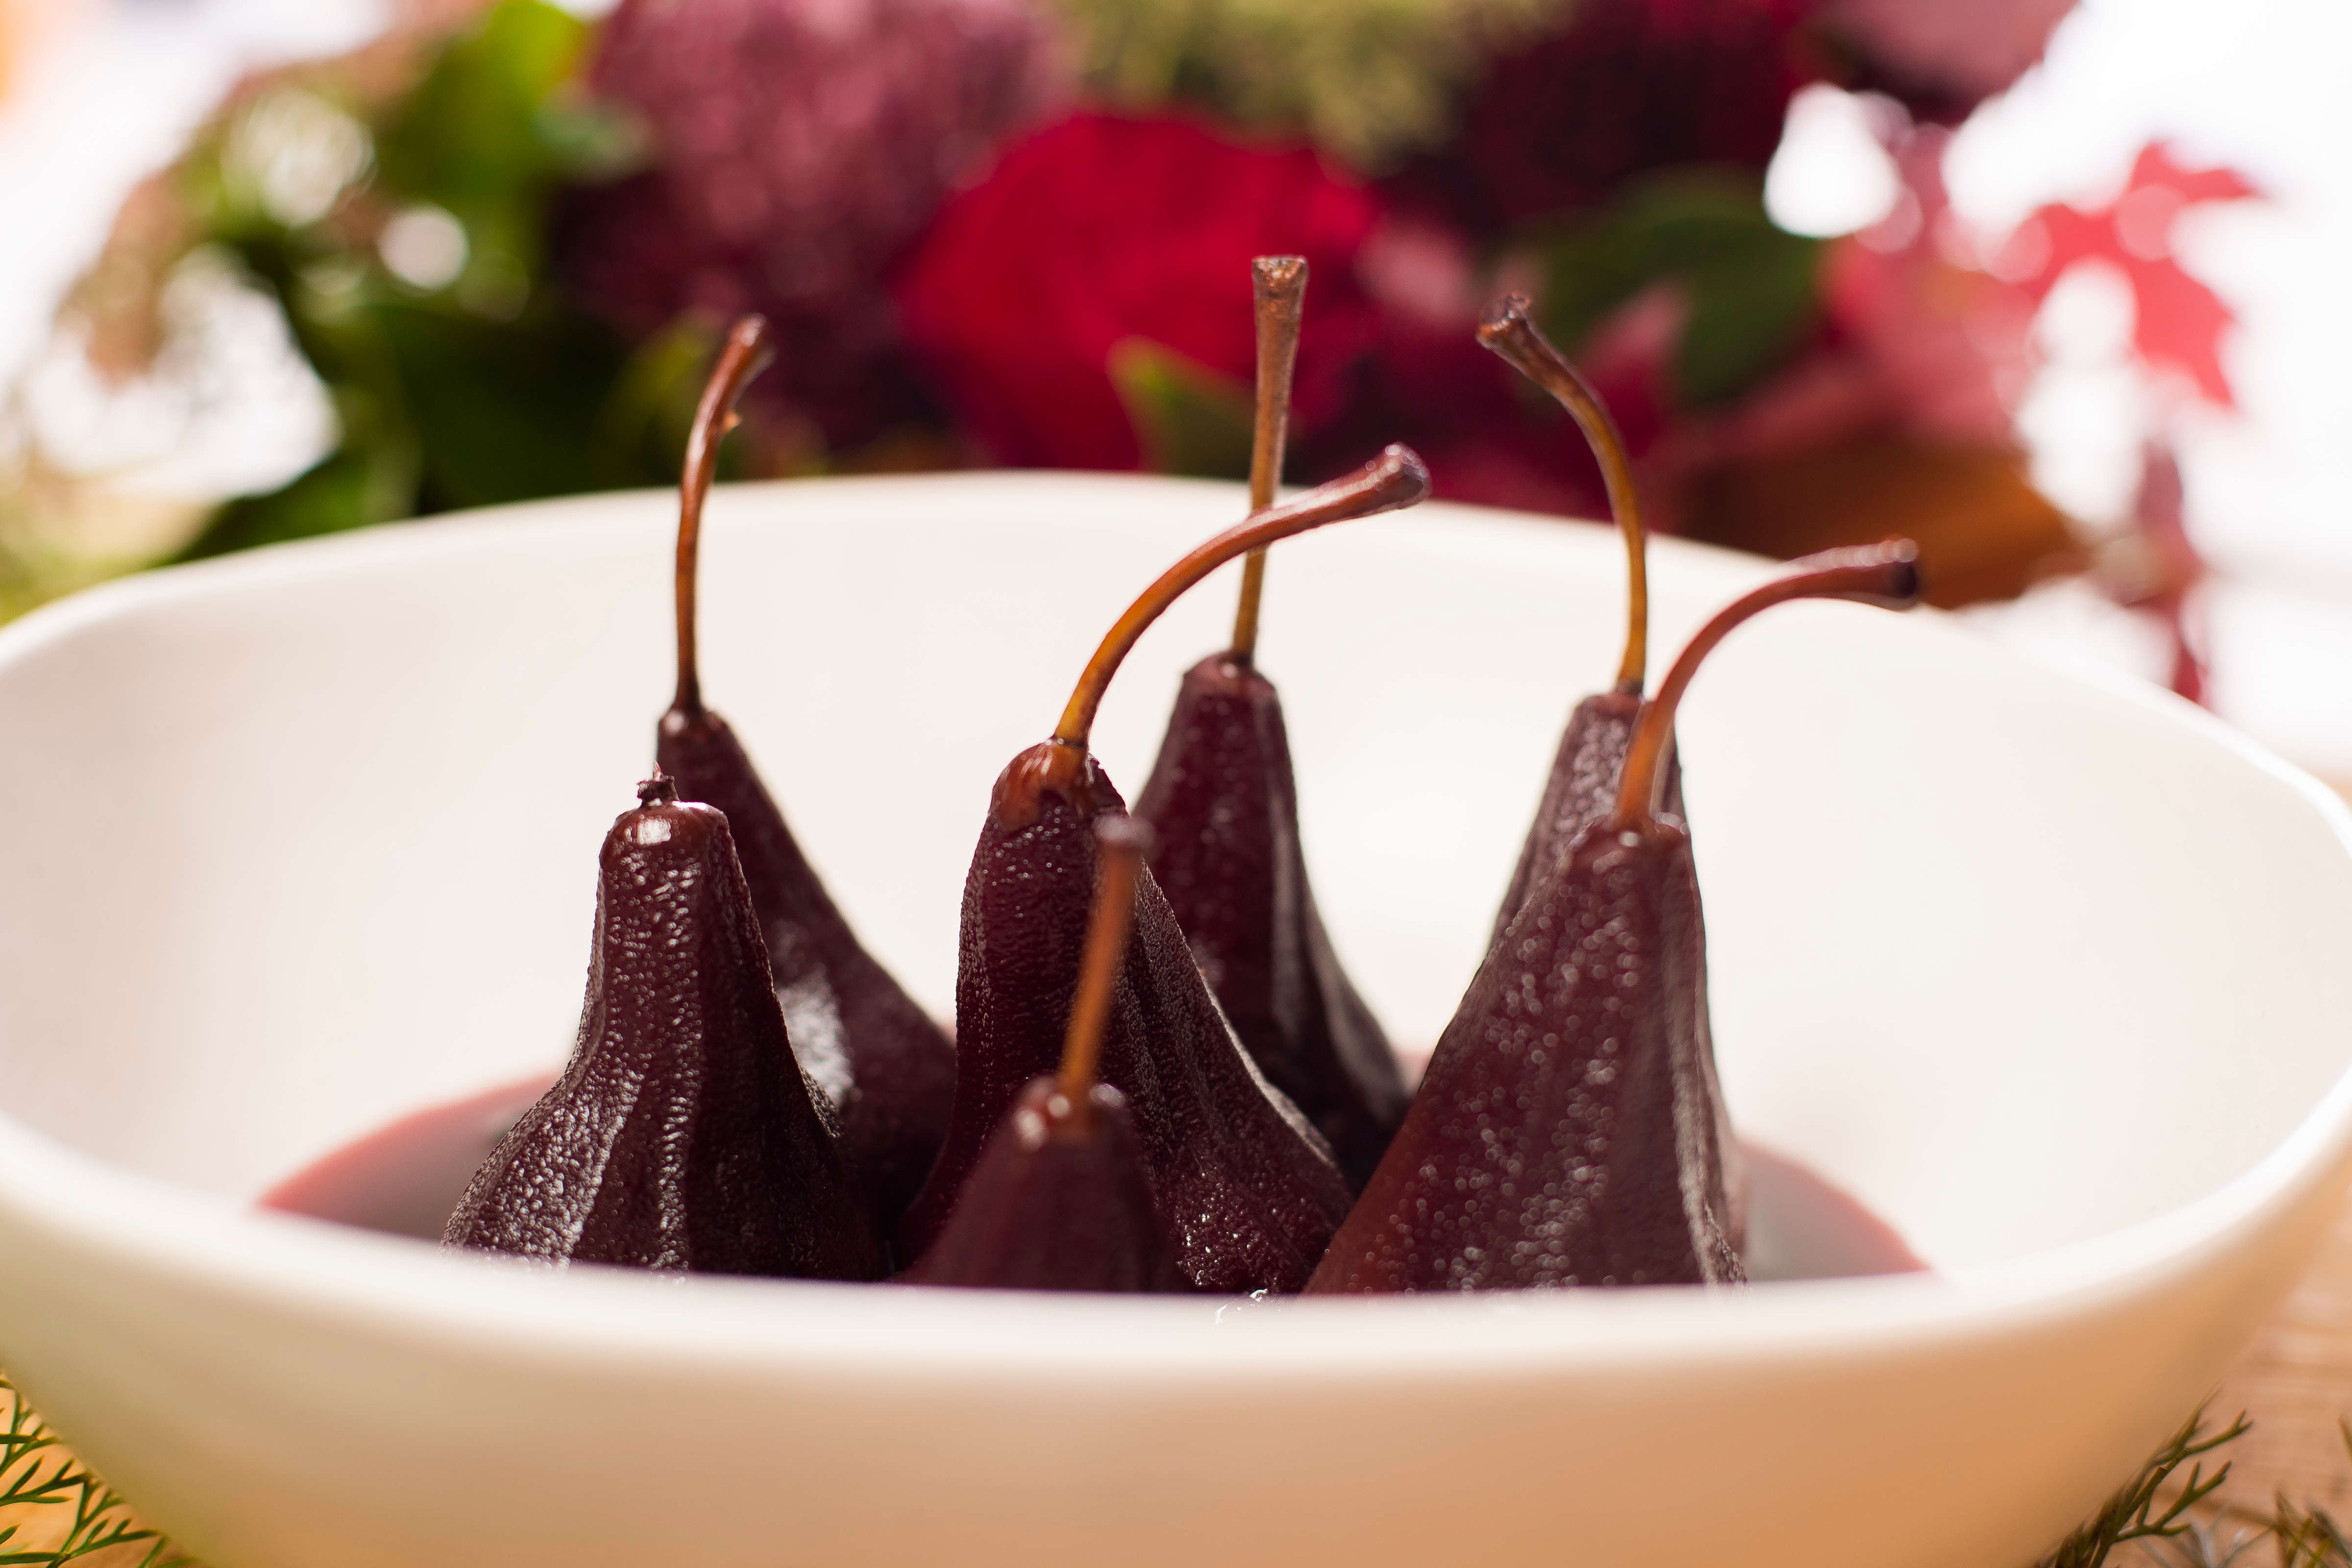 Six pears that have been poached in red wine in a white bowl with syrup. Photo: Richard Jupe.